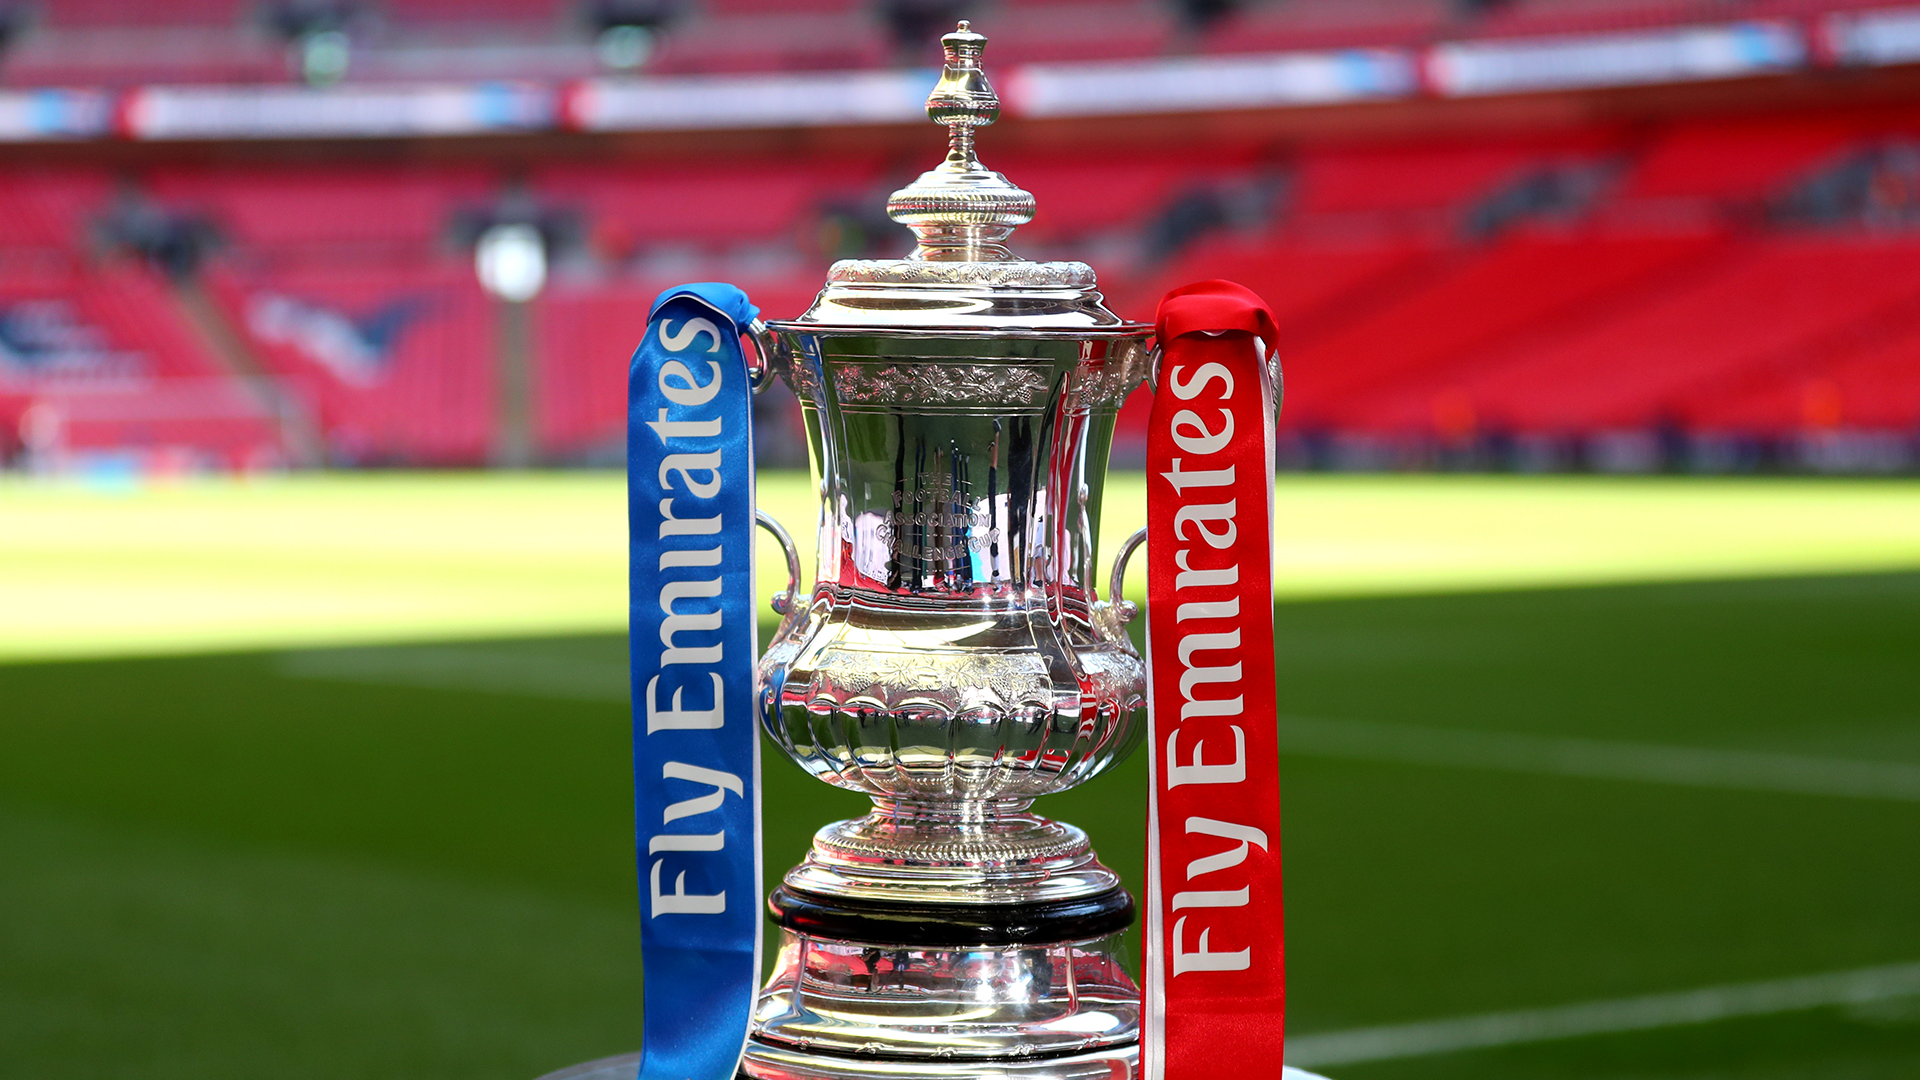 FA Cup semi-final & final tickets: How to buy, prices, travel & Wembley parking ...1920 x 1080